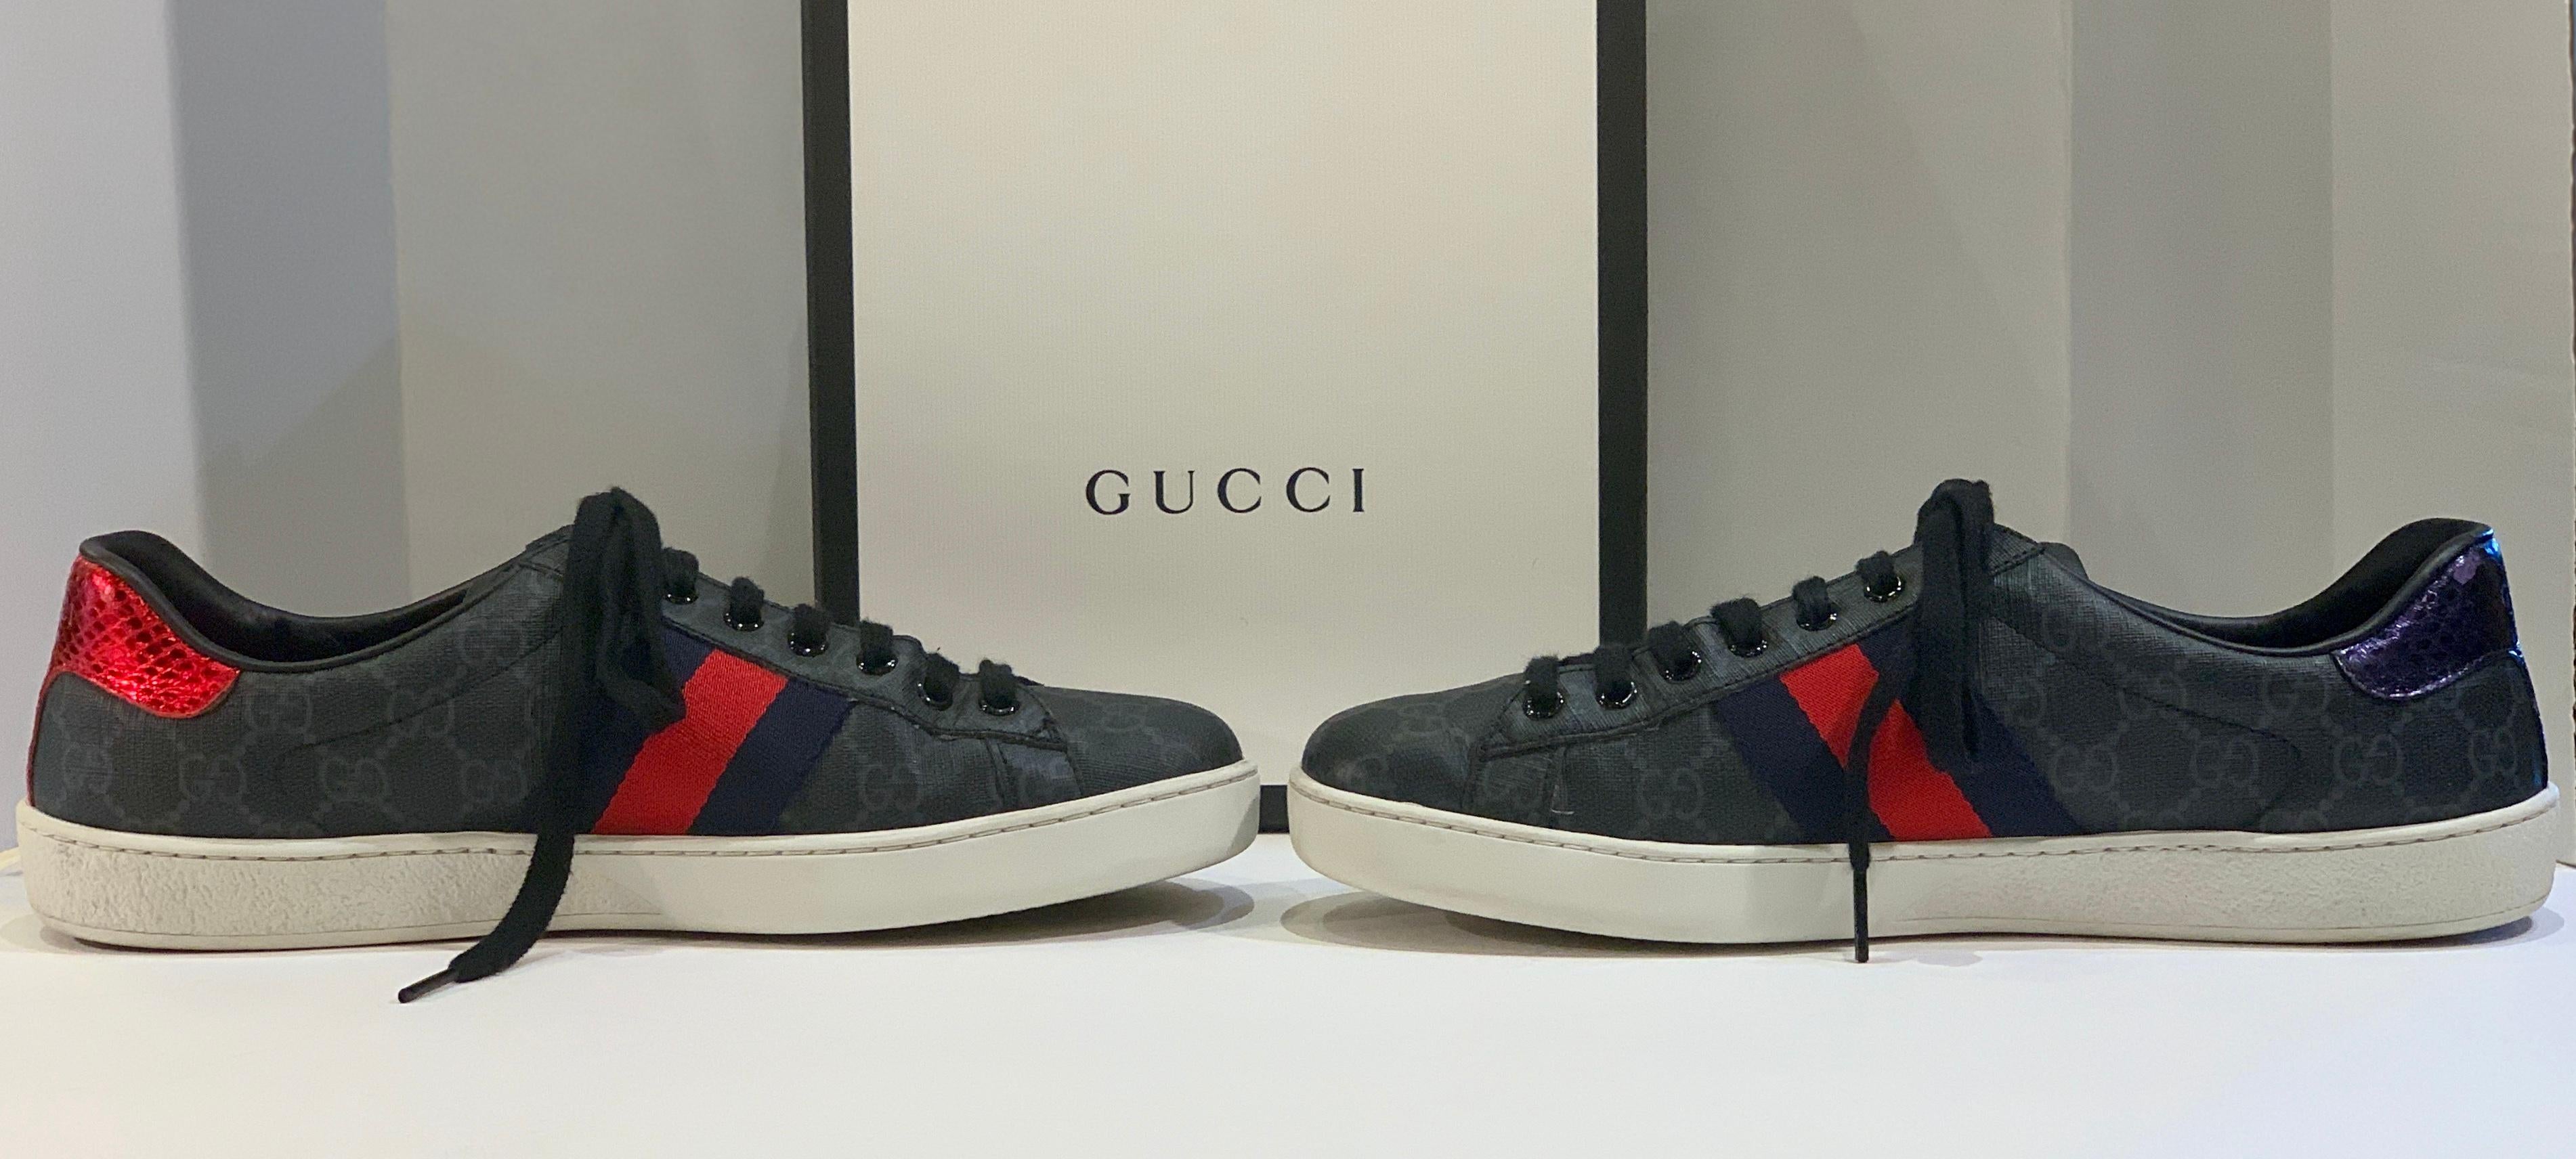 Stylish Retro GUCCI Ace GG Supreme Unisex Sneakers Size 7 Mens or Size 9 Womens 1